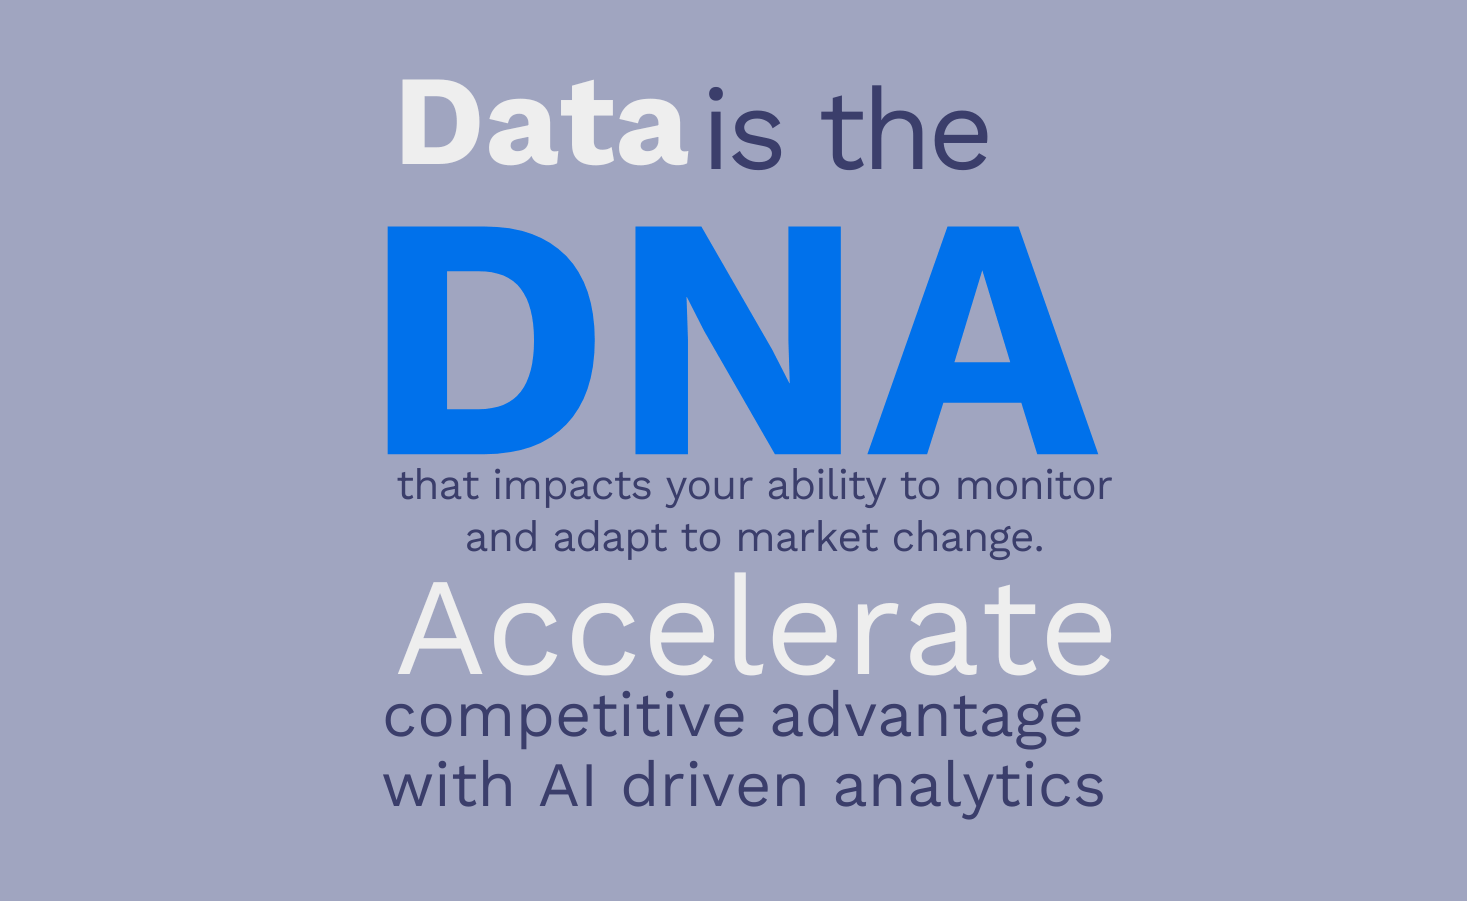 Data is the DNA that impacts your ability to monitor and adapt to market change